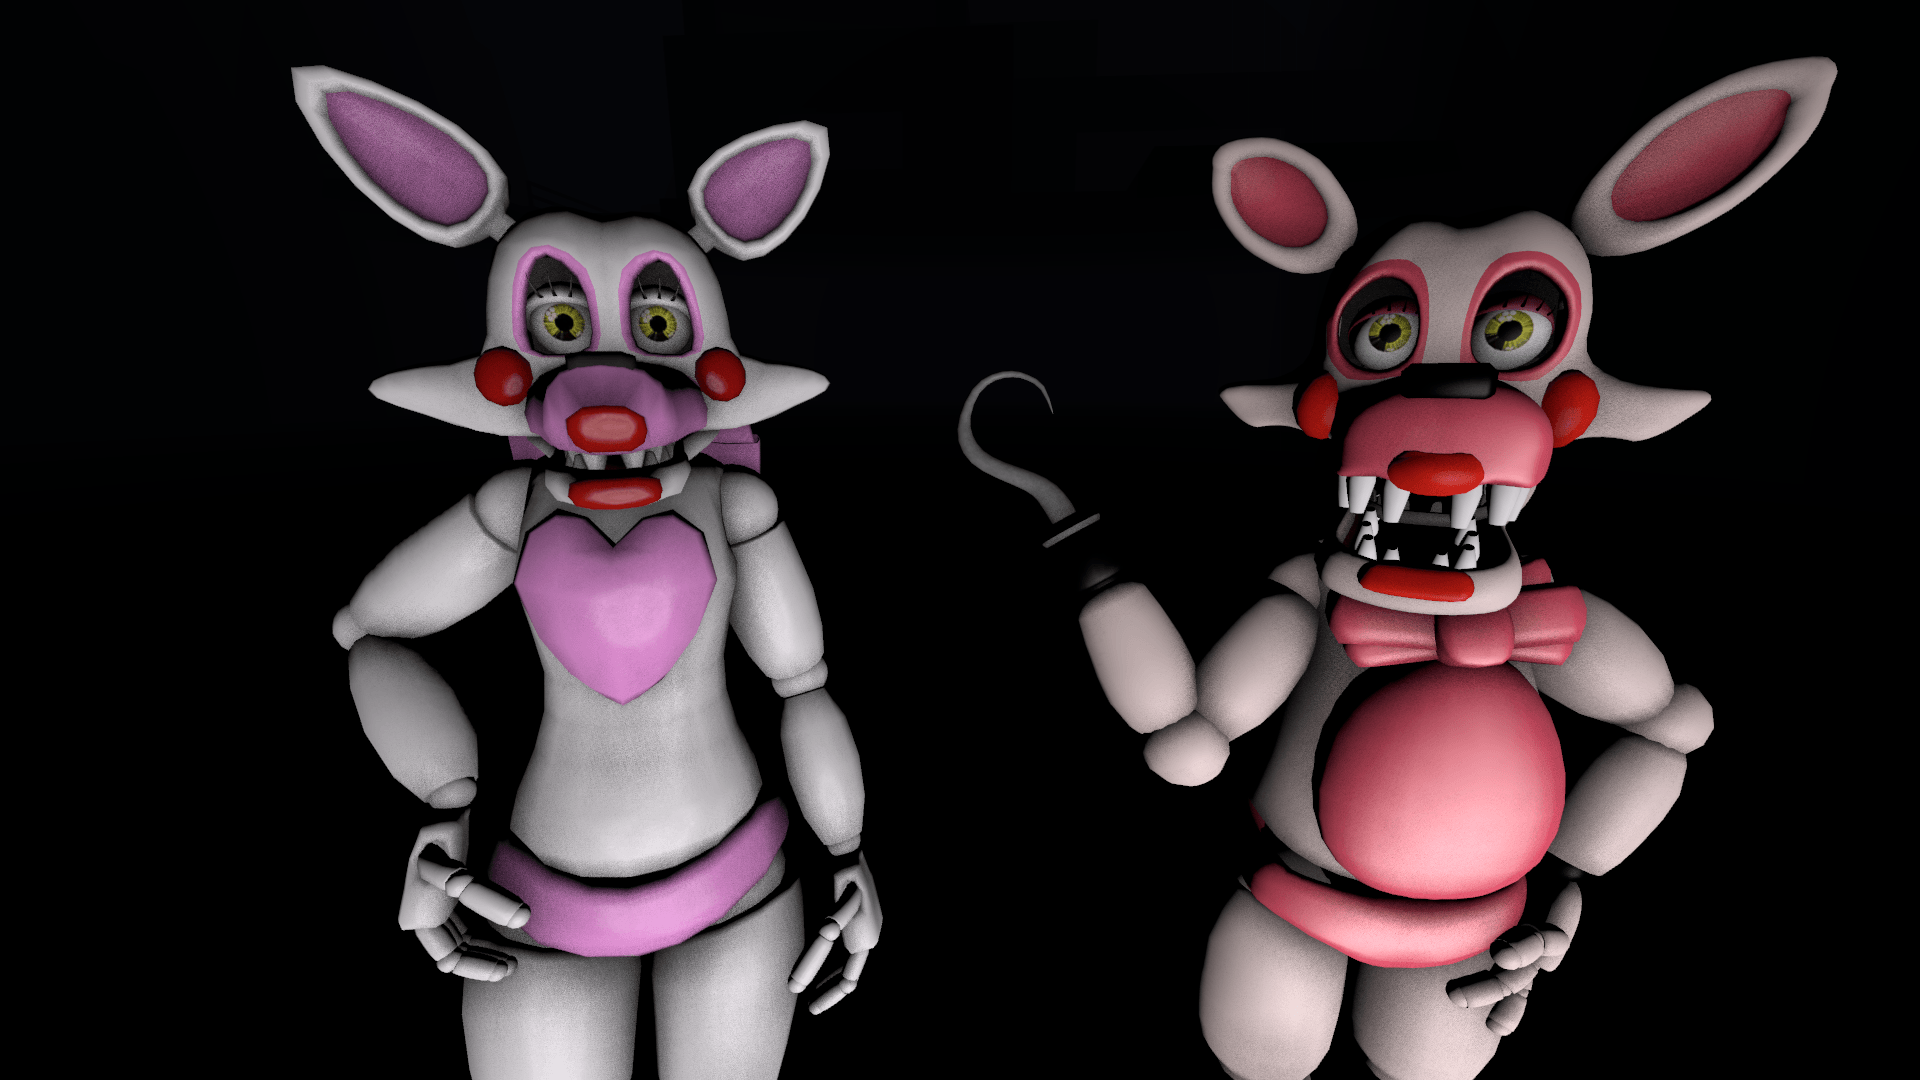 Old Mangle or New Mangle (Funtime Foxy)?